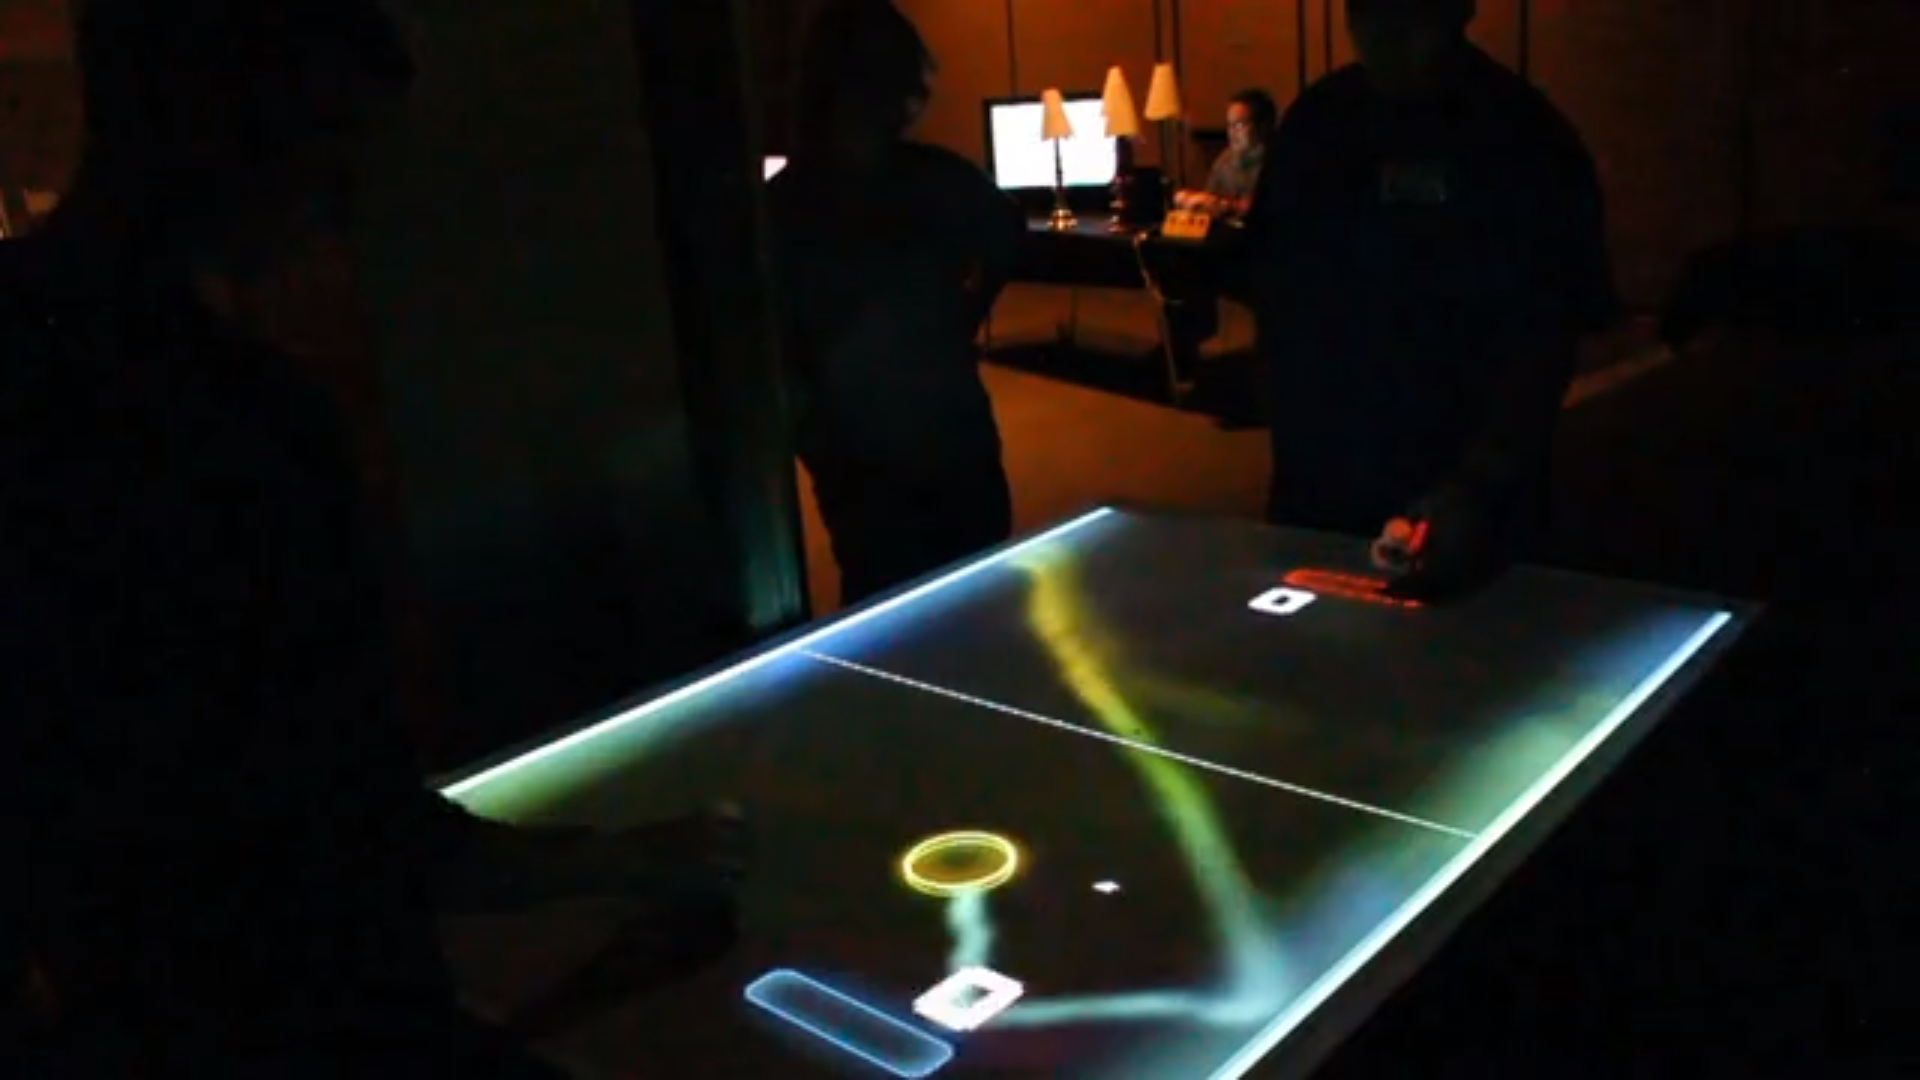 Tabletop augmented reality pong game